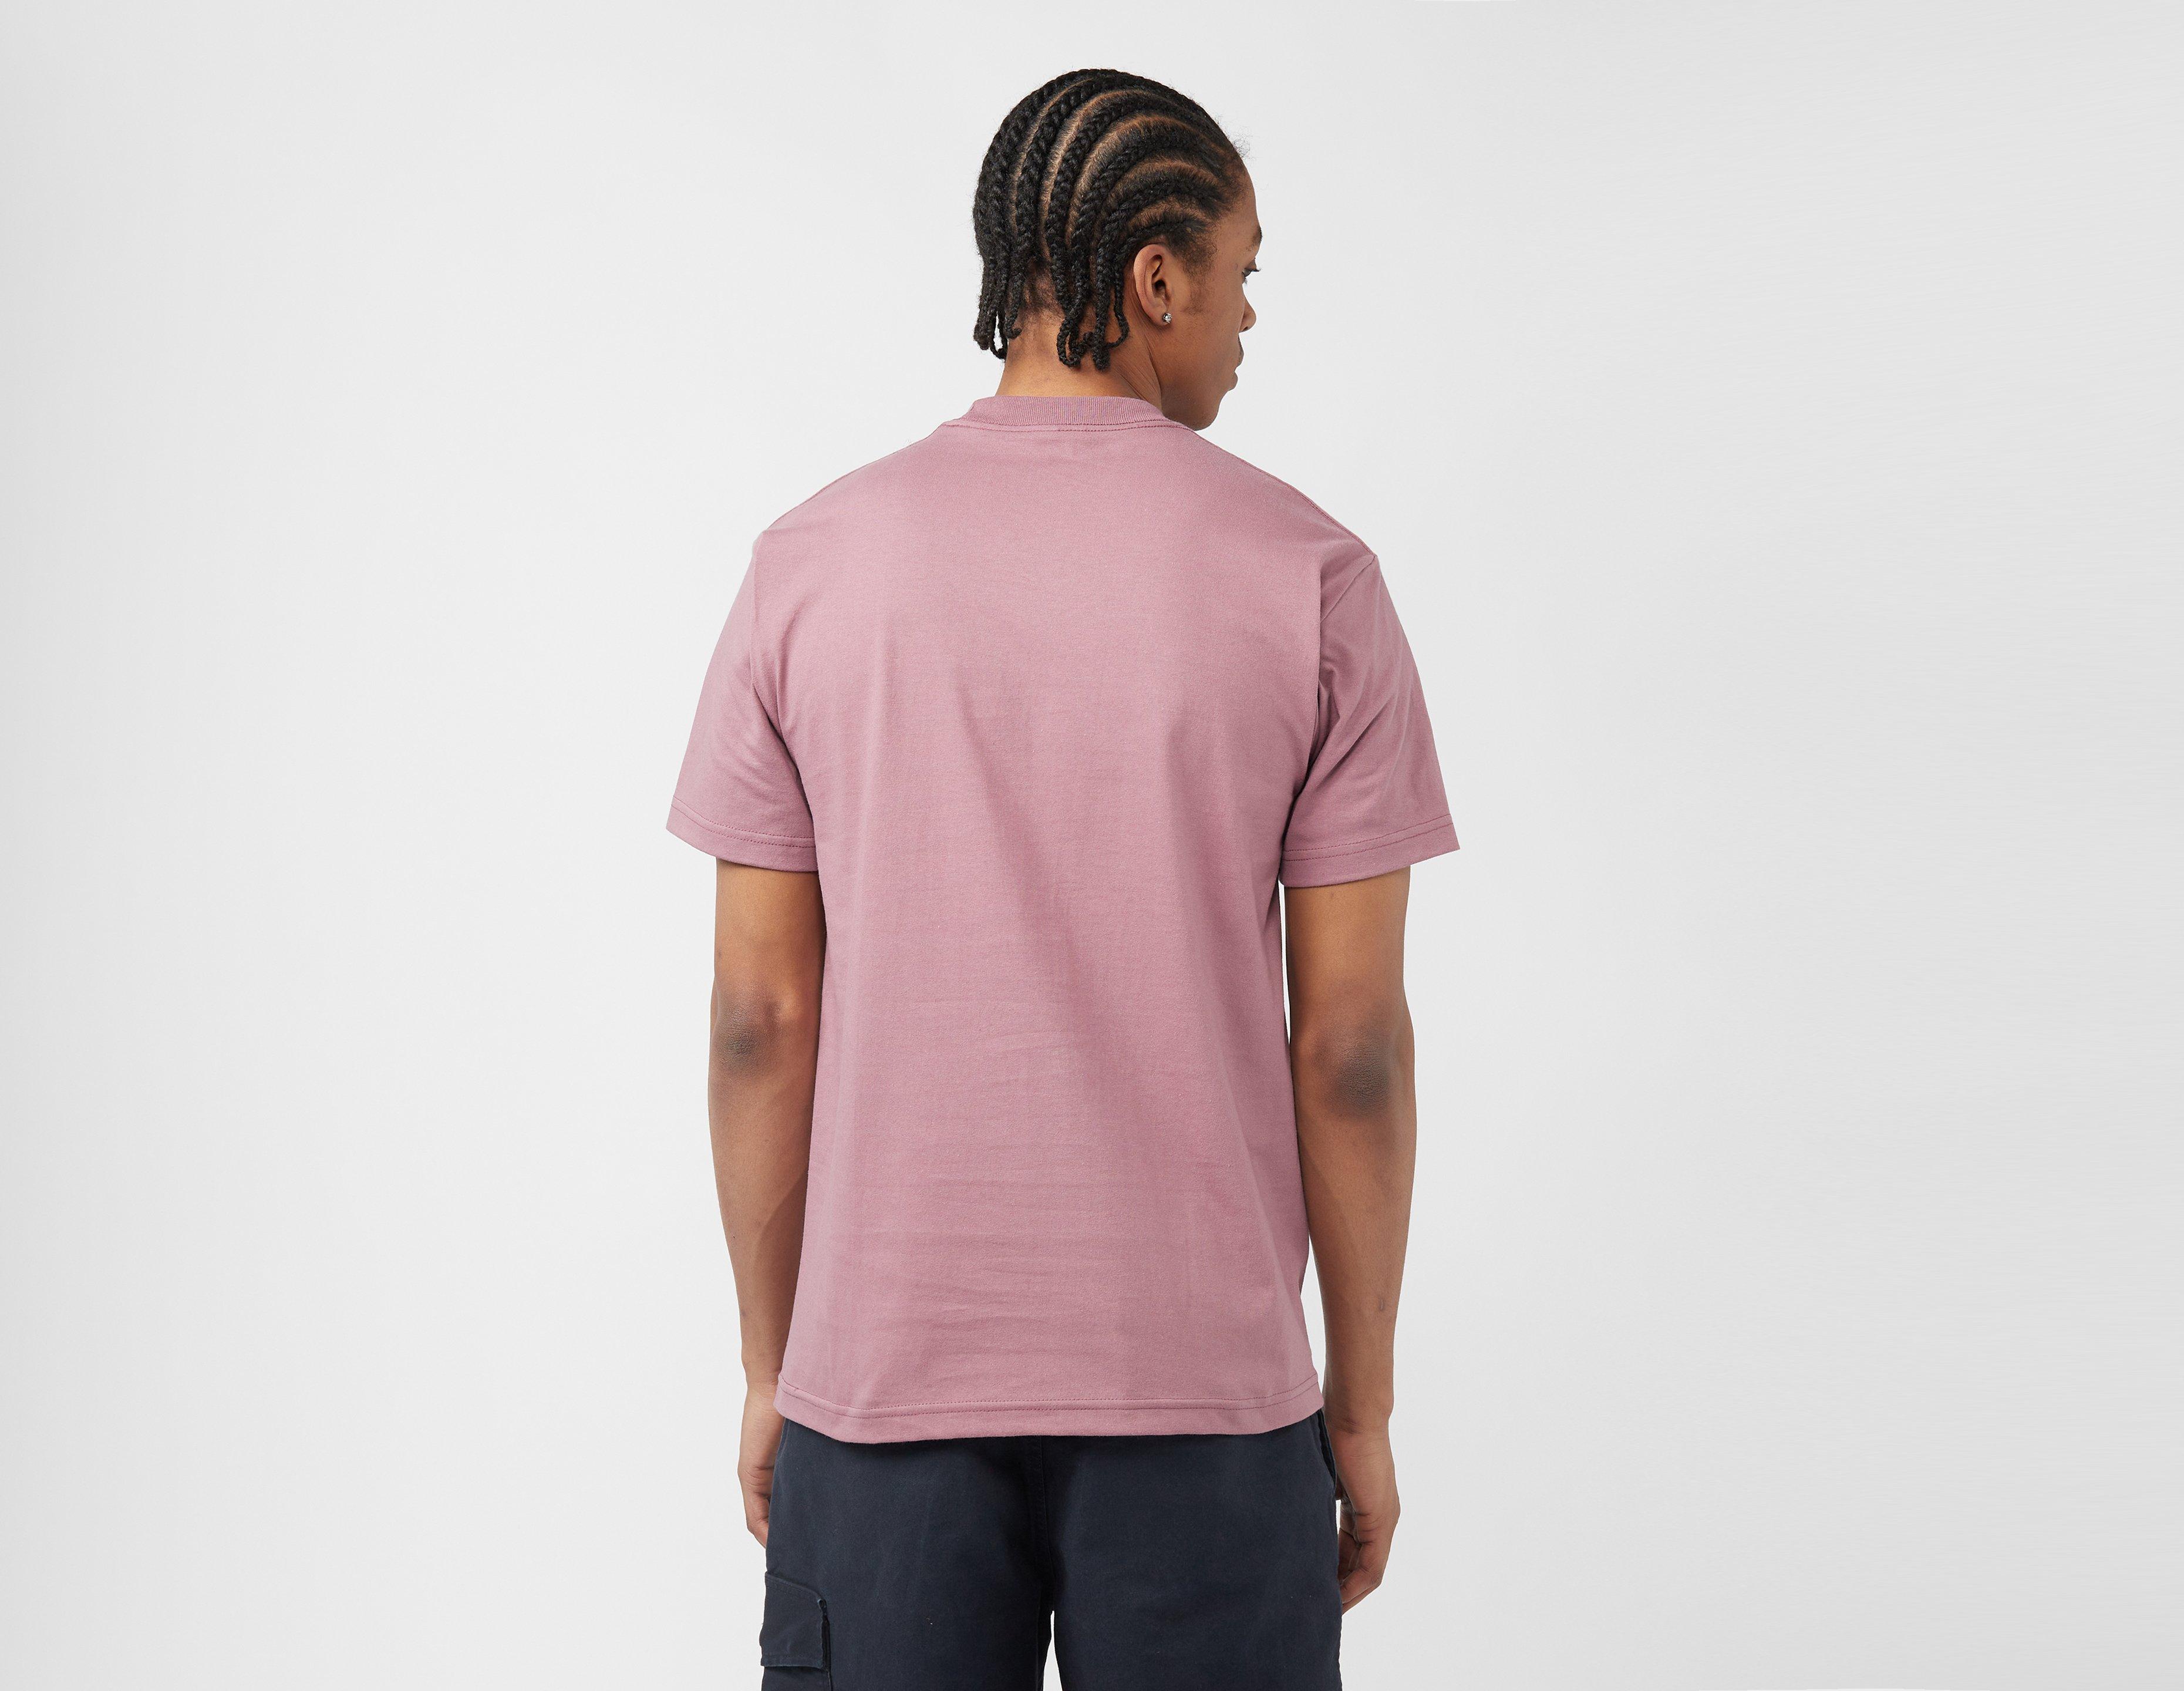 acid - In - black Shirt unchained print | T wash Best shirt Show Huf Pink in t- Healthdesign? back